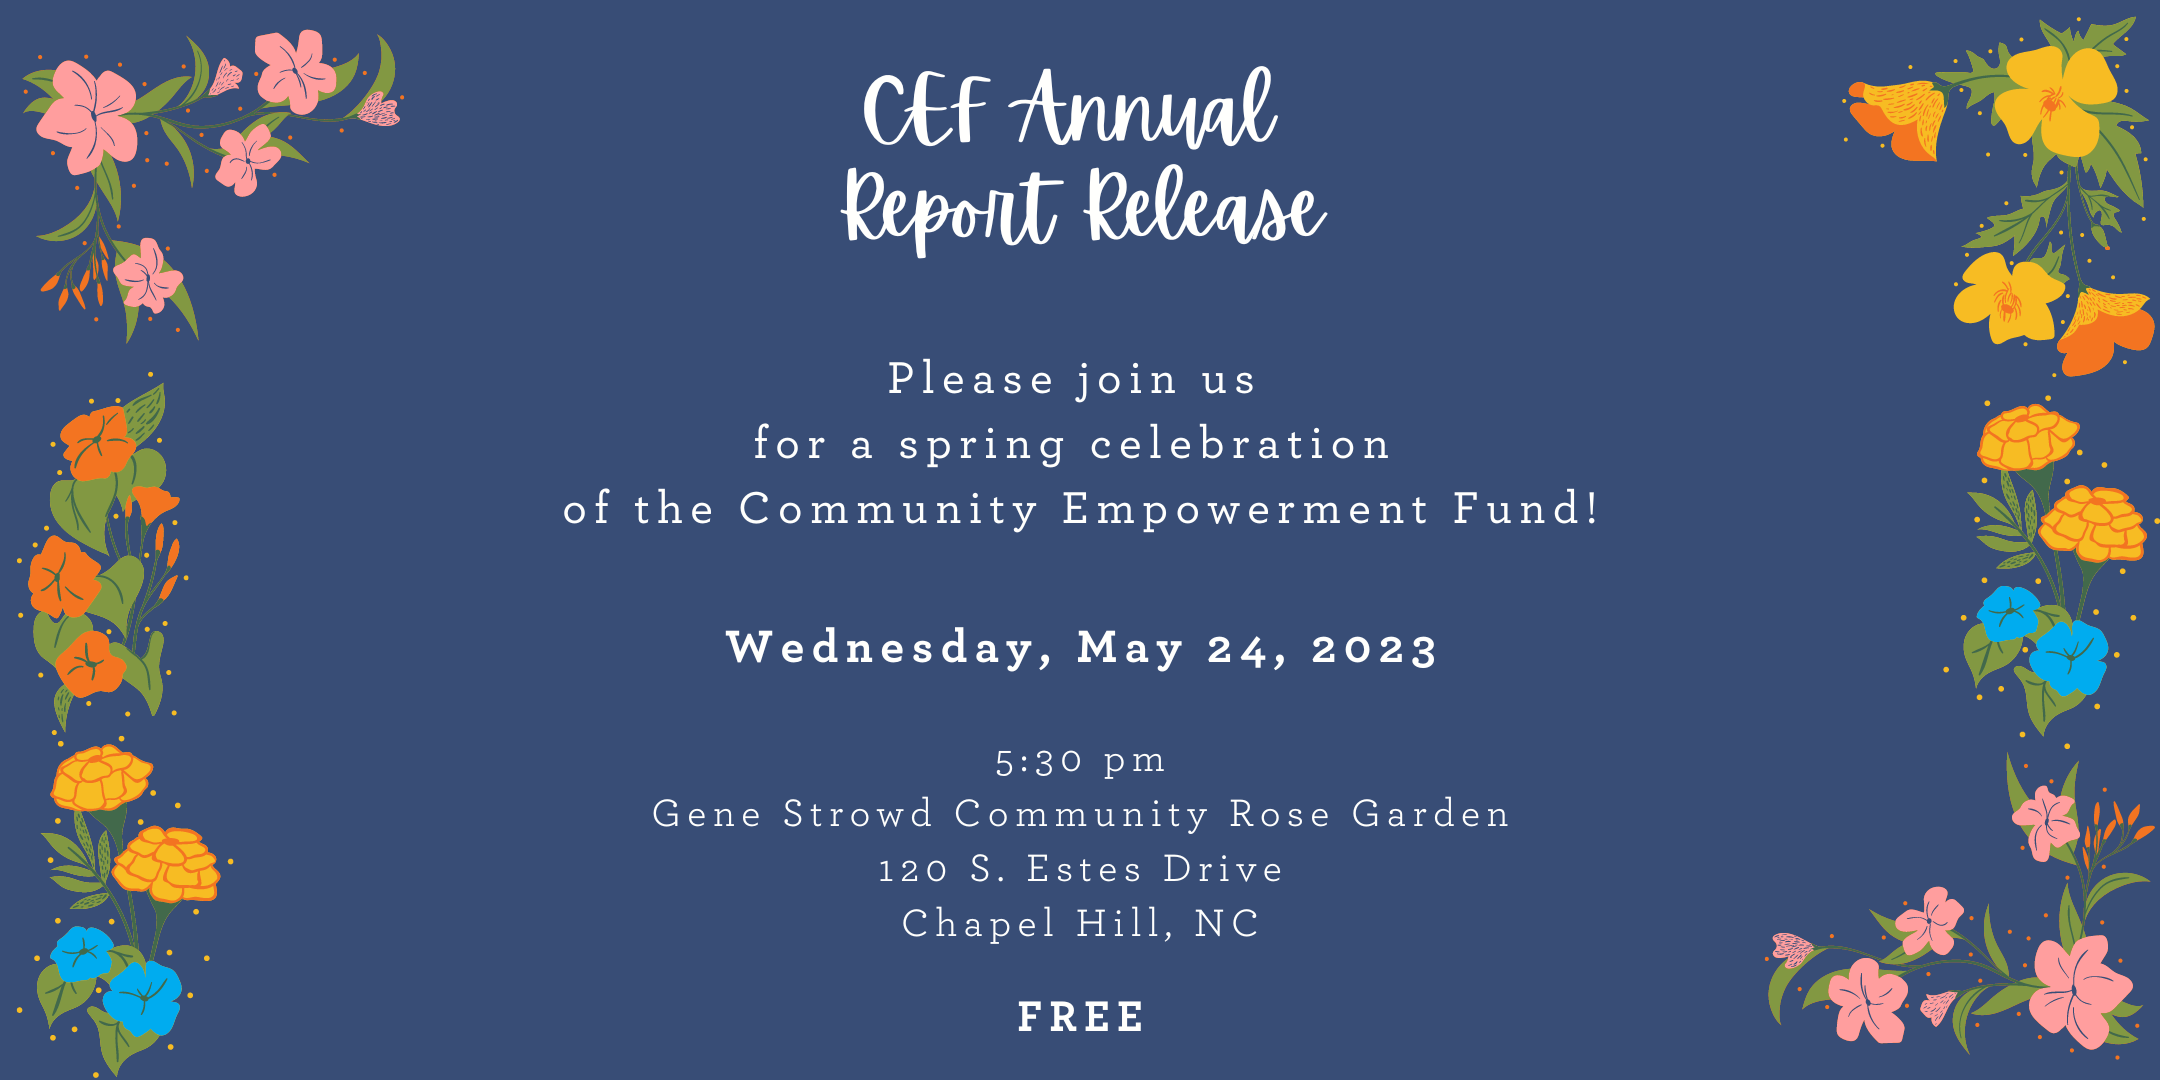 CEF Annual Report Release. Please Join us for a spring celebration of the Community Empowerment Fund! Wednesday, May 24, 2023. 5:30 pm. Gene Strowd Community Rose Garden. 130 S. Estes Drive Chapel Hill, NC. Free. Image has a dark blue background and white text. There are pink, orange, yellow, and blue flowers along the left and right borders.